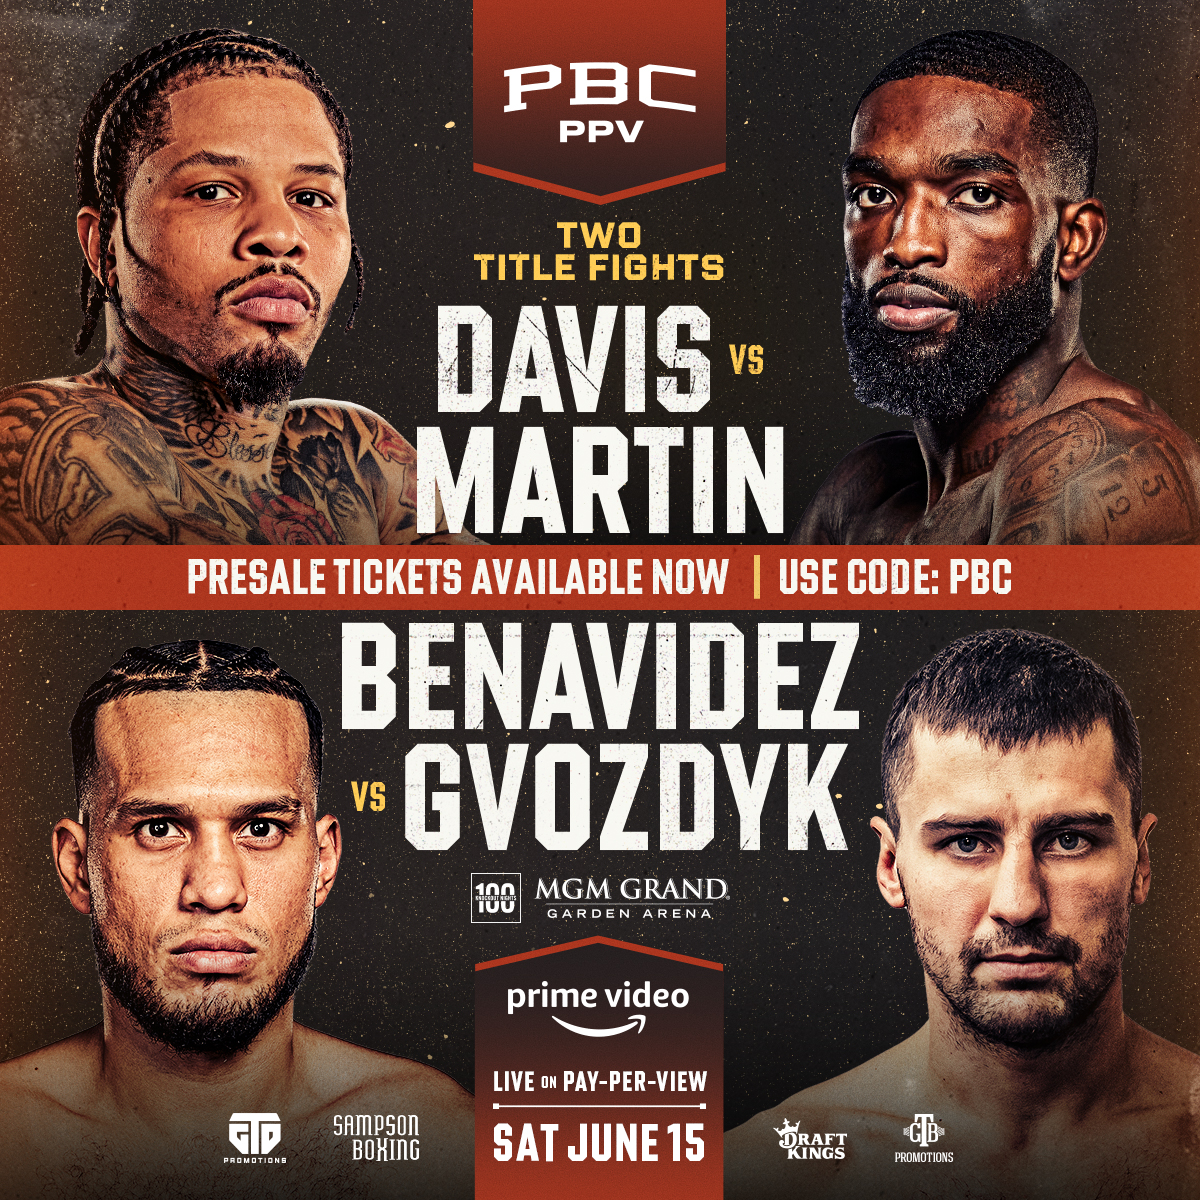 🎟️ Presale tickets for #TankMartin & #BenavidezGvozdyk on June 15 at @MGMGrand are available NOW! Get yours while they last. 🔗 (Use code: PBC): pbcham.ps/DavisMartinTIX #TankMartin #BenavidezGvozdyk